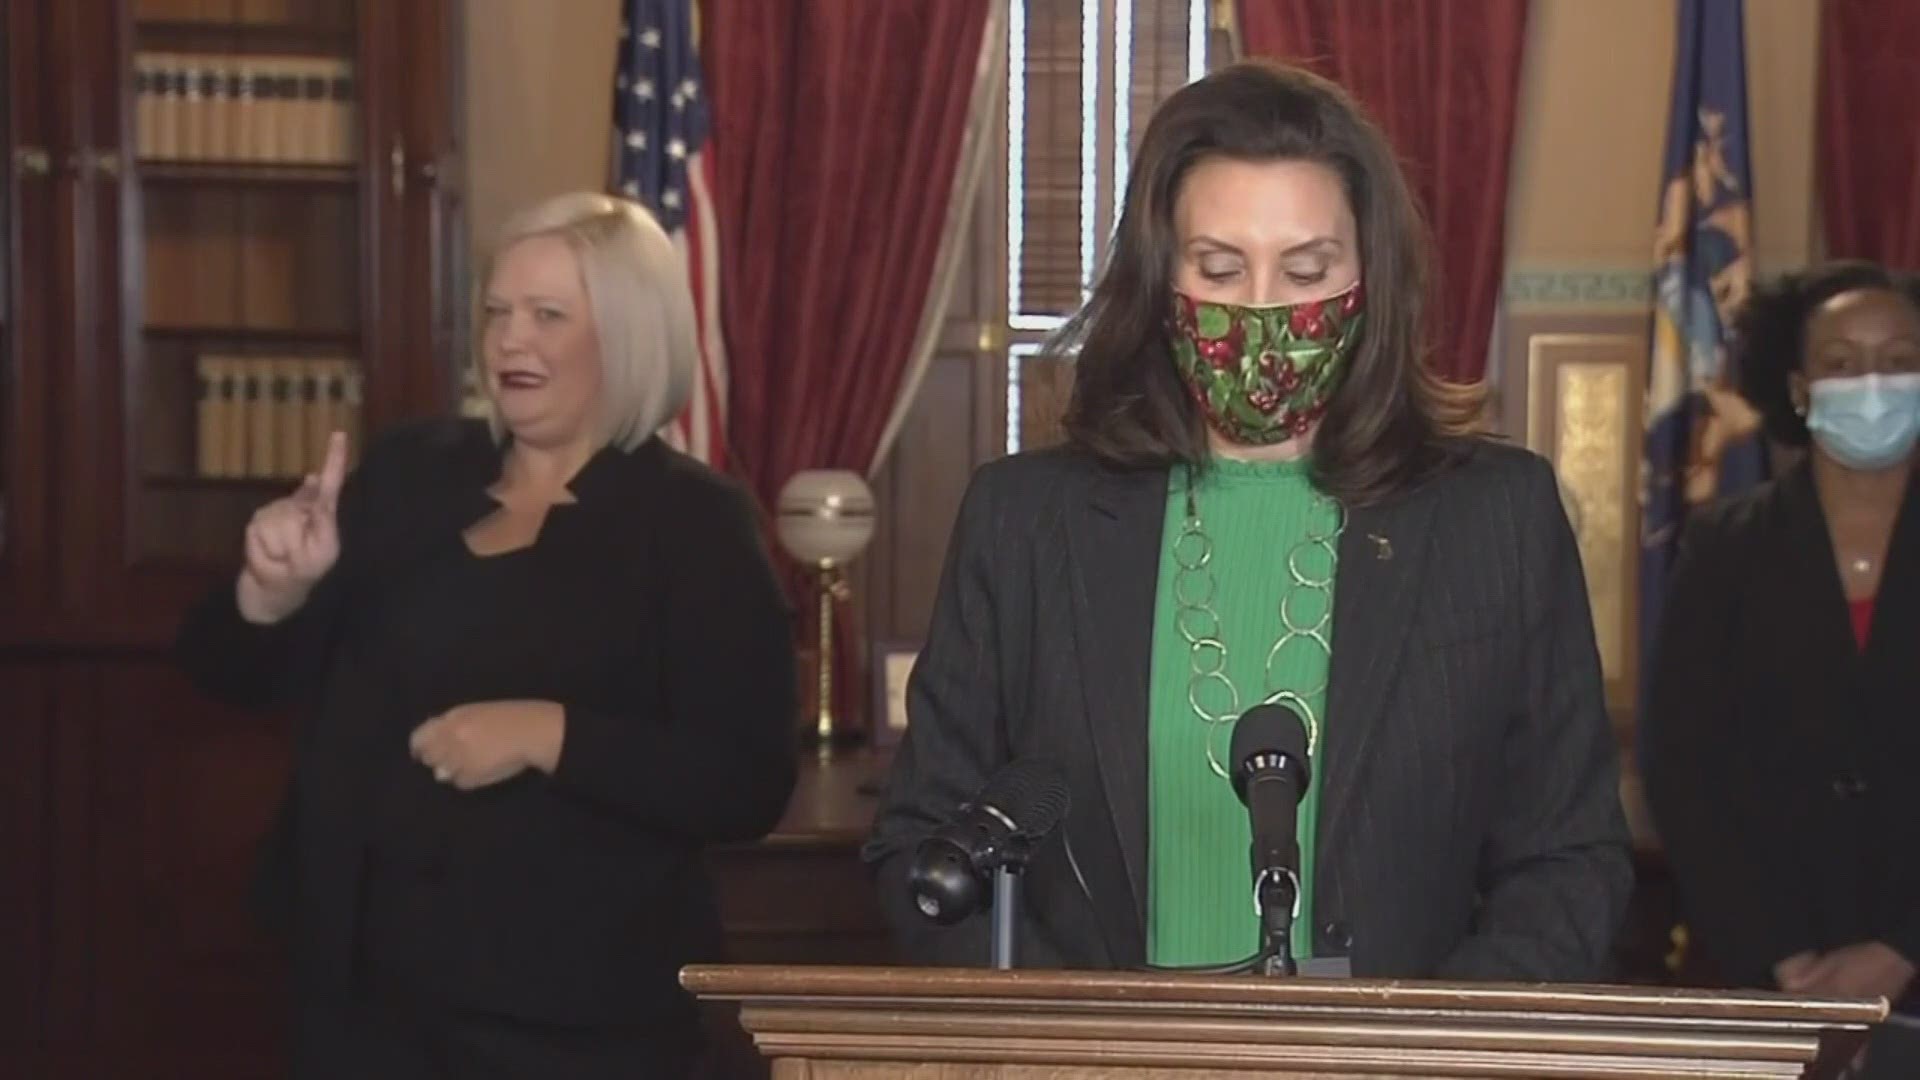 Whitmer also announced a bipartisan protect Michigan commission Thursday.